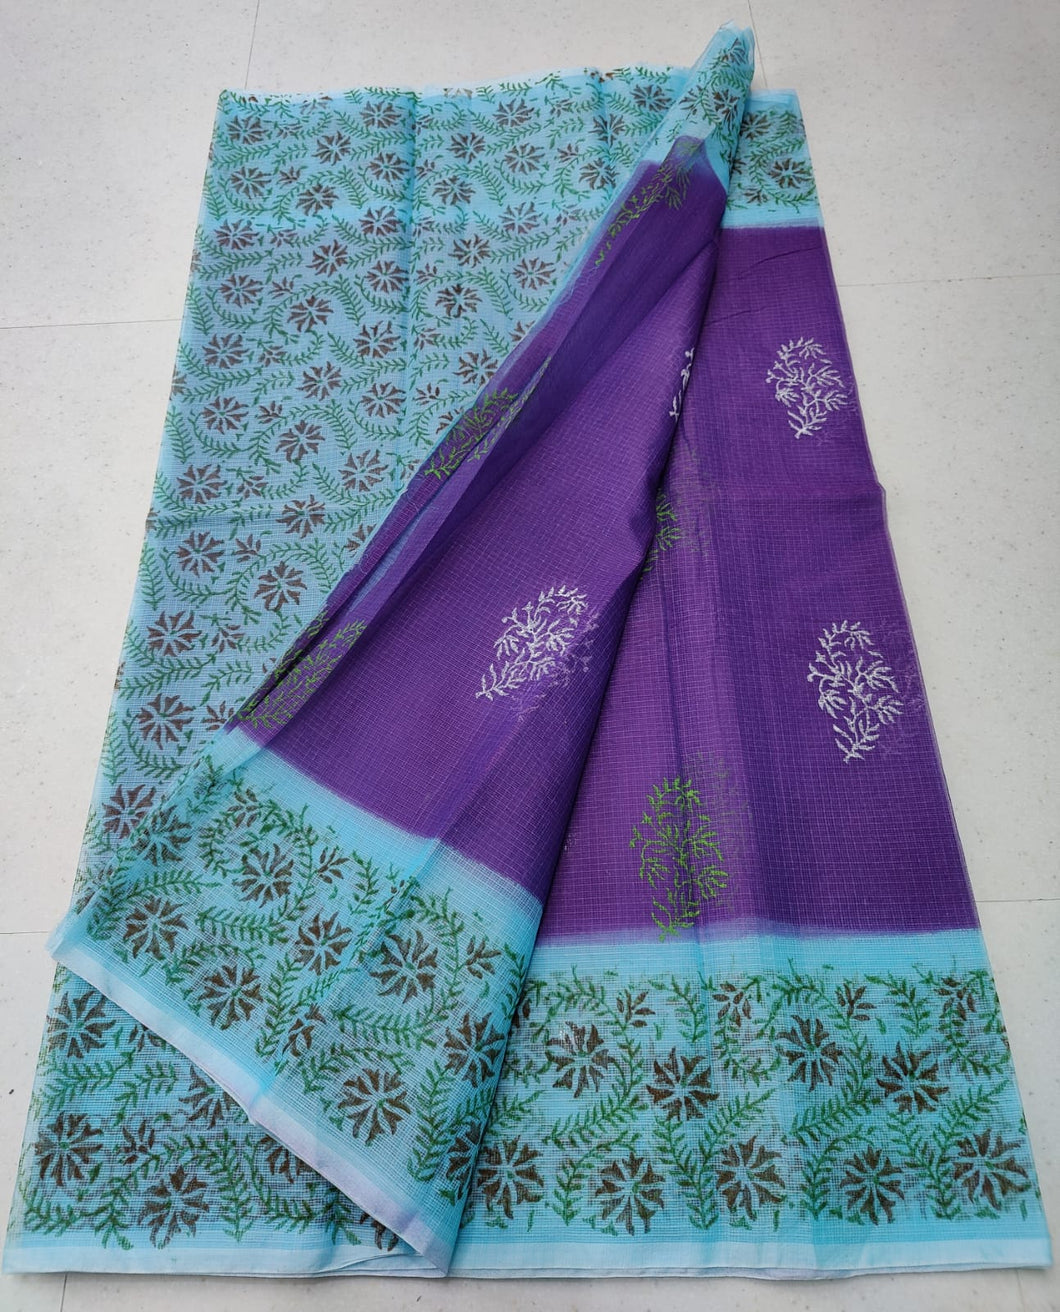 Exquisite Purple Colored Green Leafy KotaDoria Dye Block Printed Cotton Saree With Running Blouse